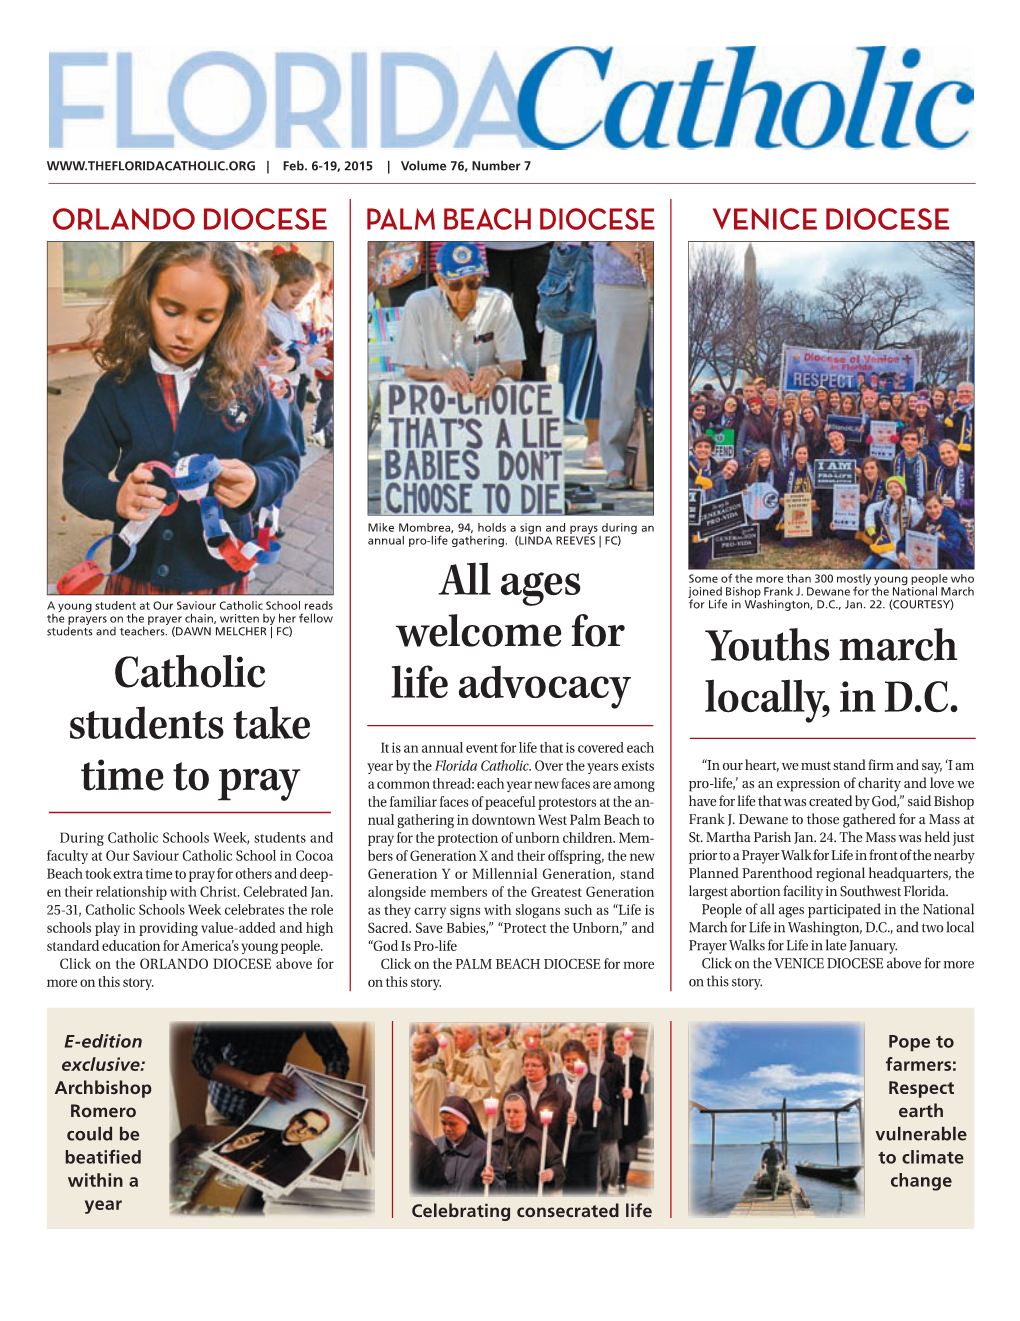 Catholic Students Take Time to Pray All Ages Welcome for Life Advocacy